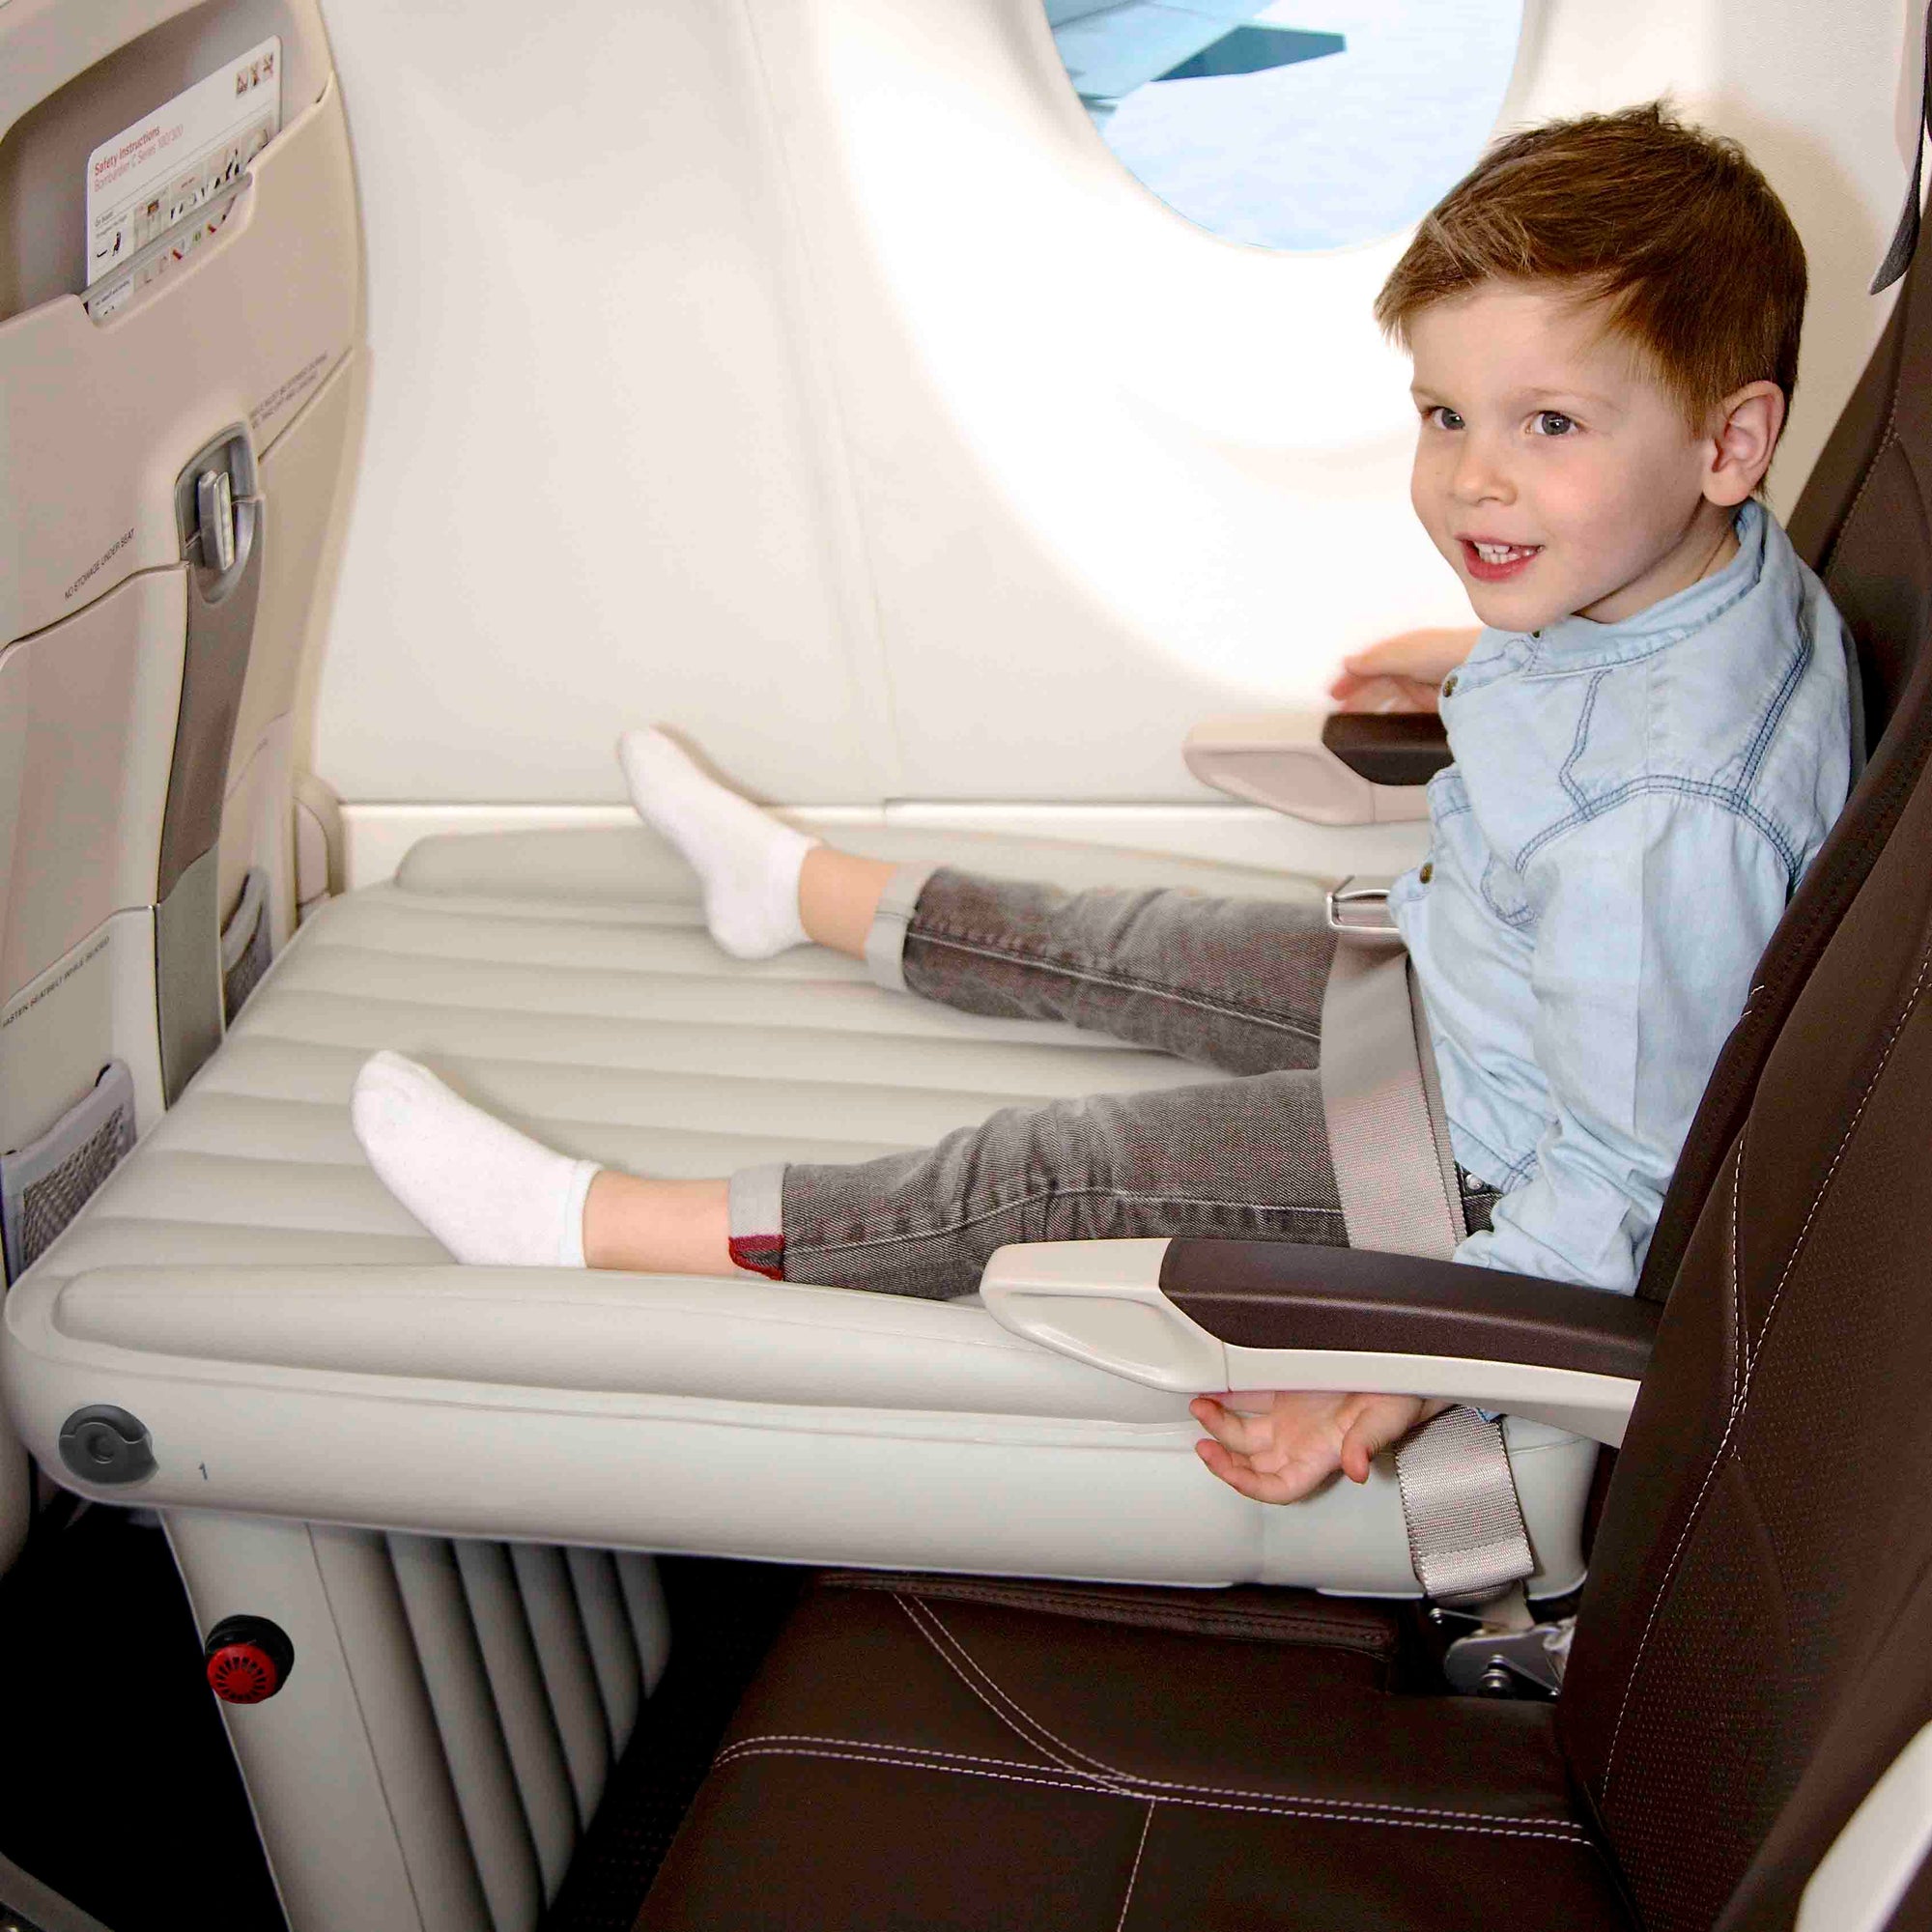 Airplane Footrest for Kids,Travel Airplane Toddler Bed,Portable Toddler Bed  for Travel,Travel Foot Rest for Airplane Flights,Travel Seat Cushion for